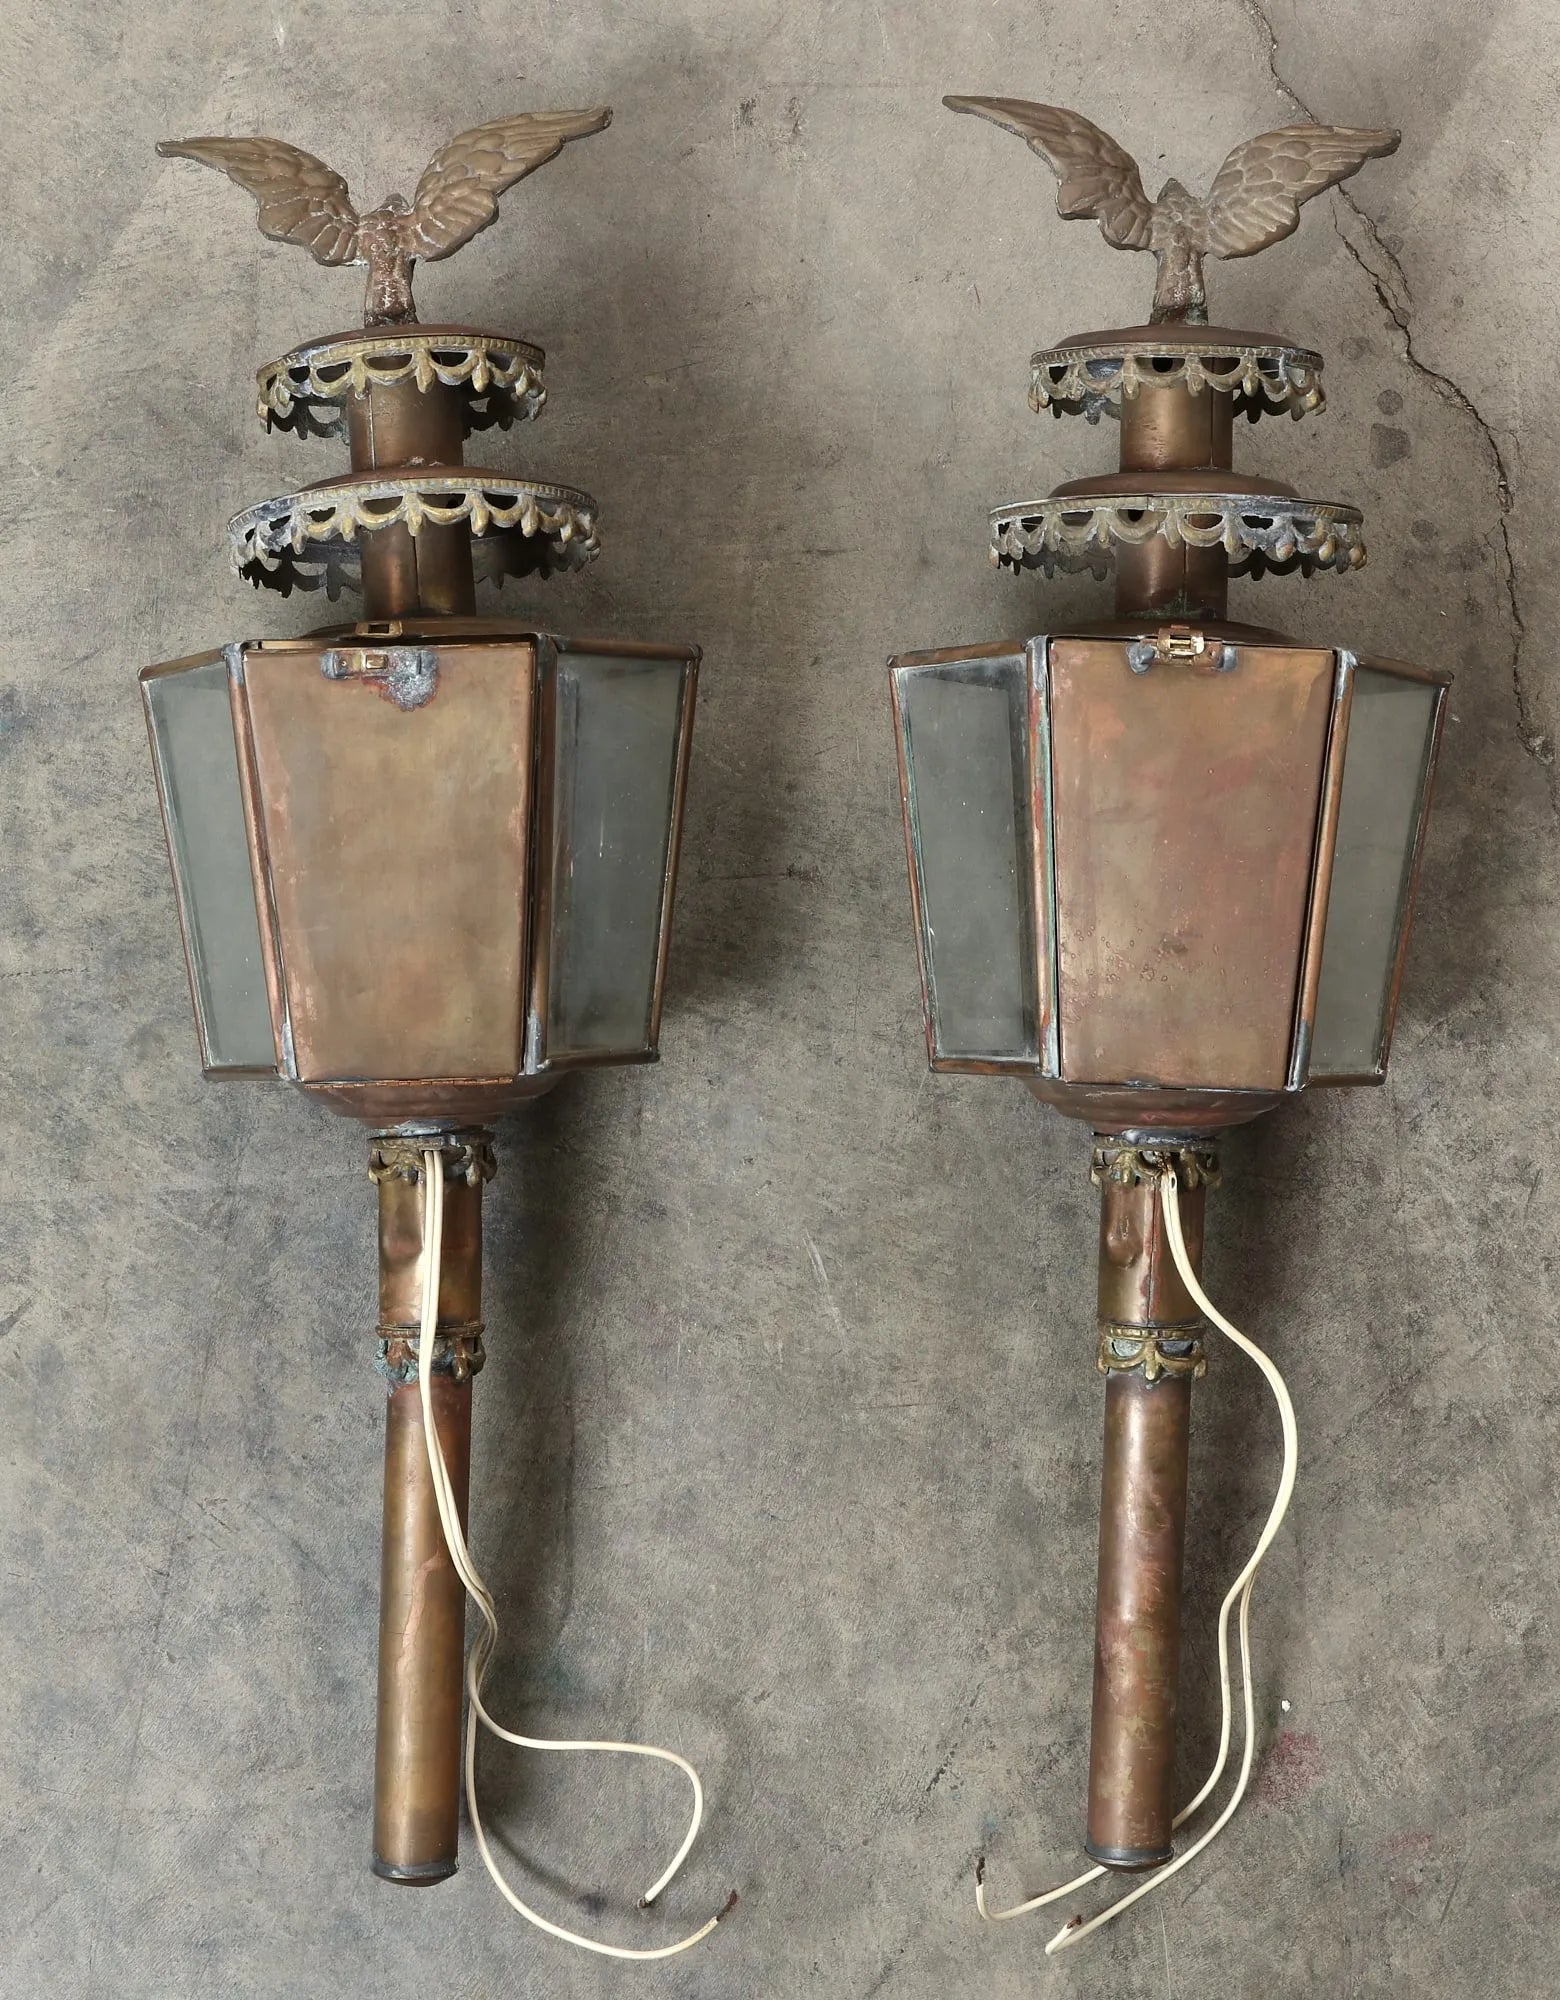 AL3-006: Pair of Early 19th Century American Federal Coach Lanterns Converted to Electric Outdoor Sconces